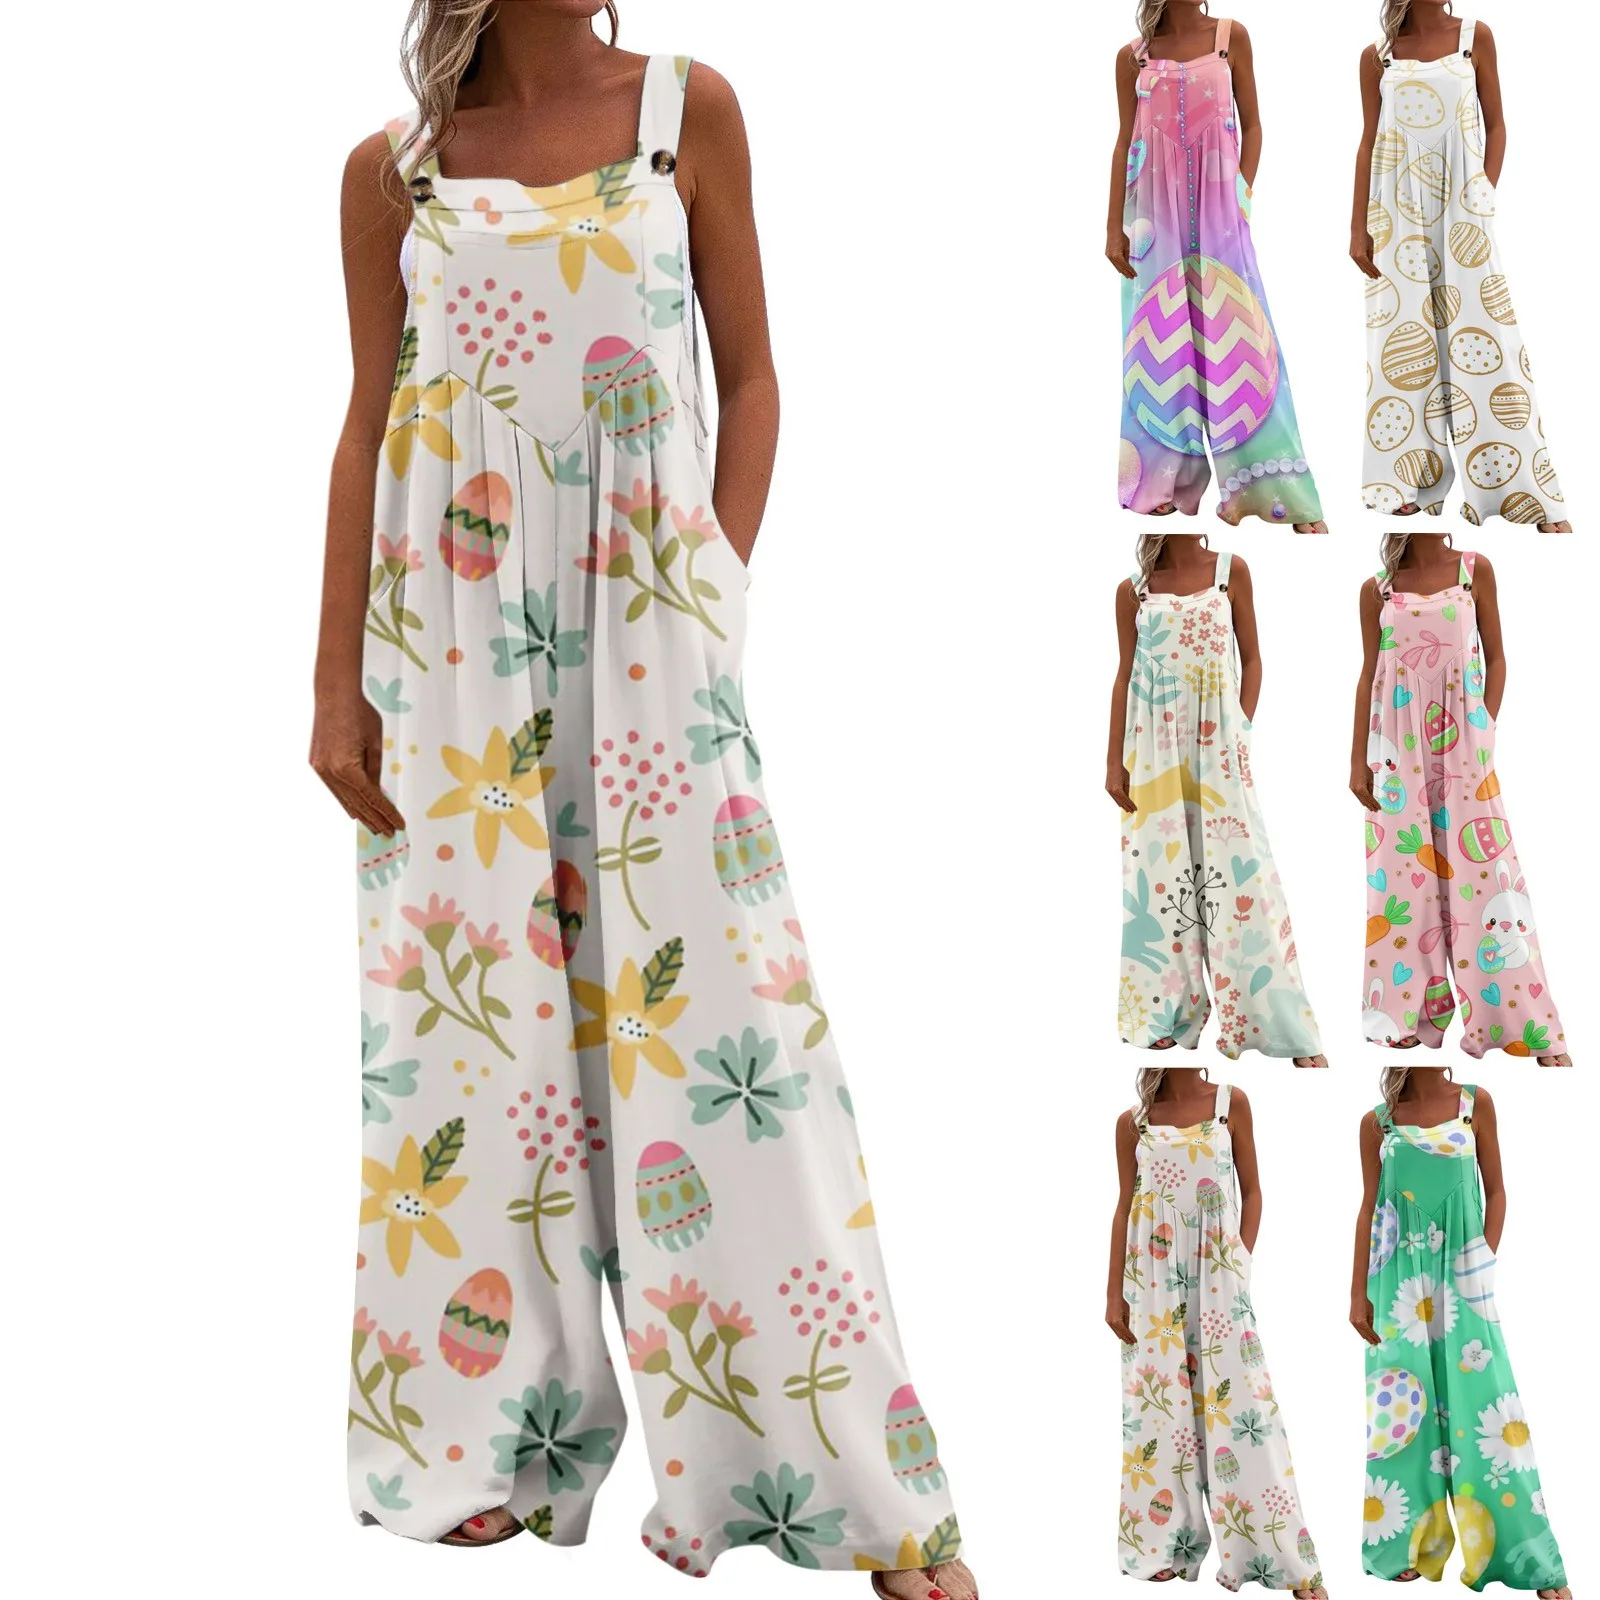 

Women's Overalls Casual Funny Printed Wide Leg Jumpsuits Bib Rompers Sleeveless Straps With Pockets Outfits فساتين ميدي